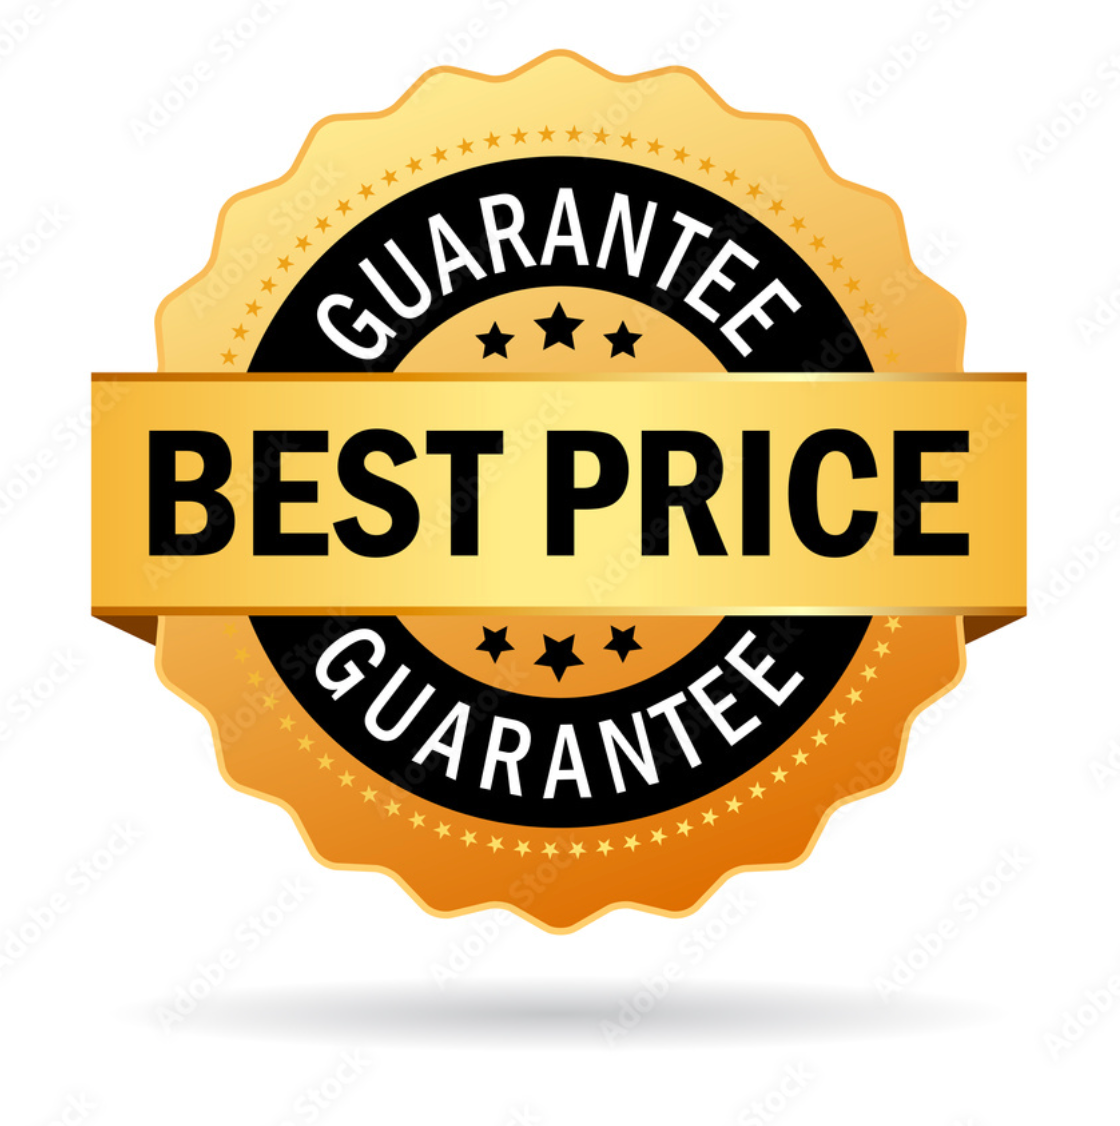 We've got the best prices in the industry on Gozney brand products... GUARANTEED!